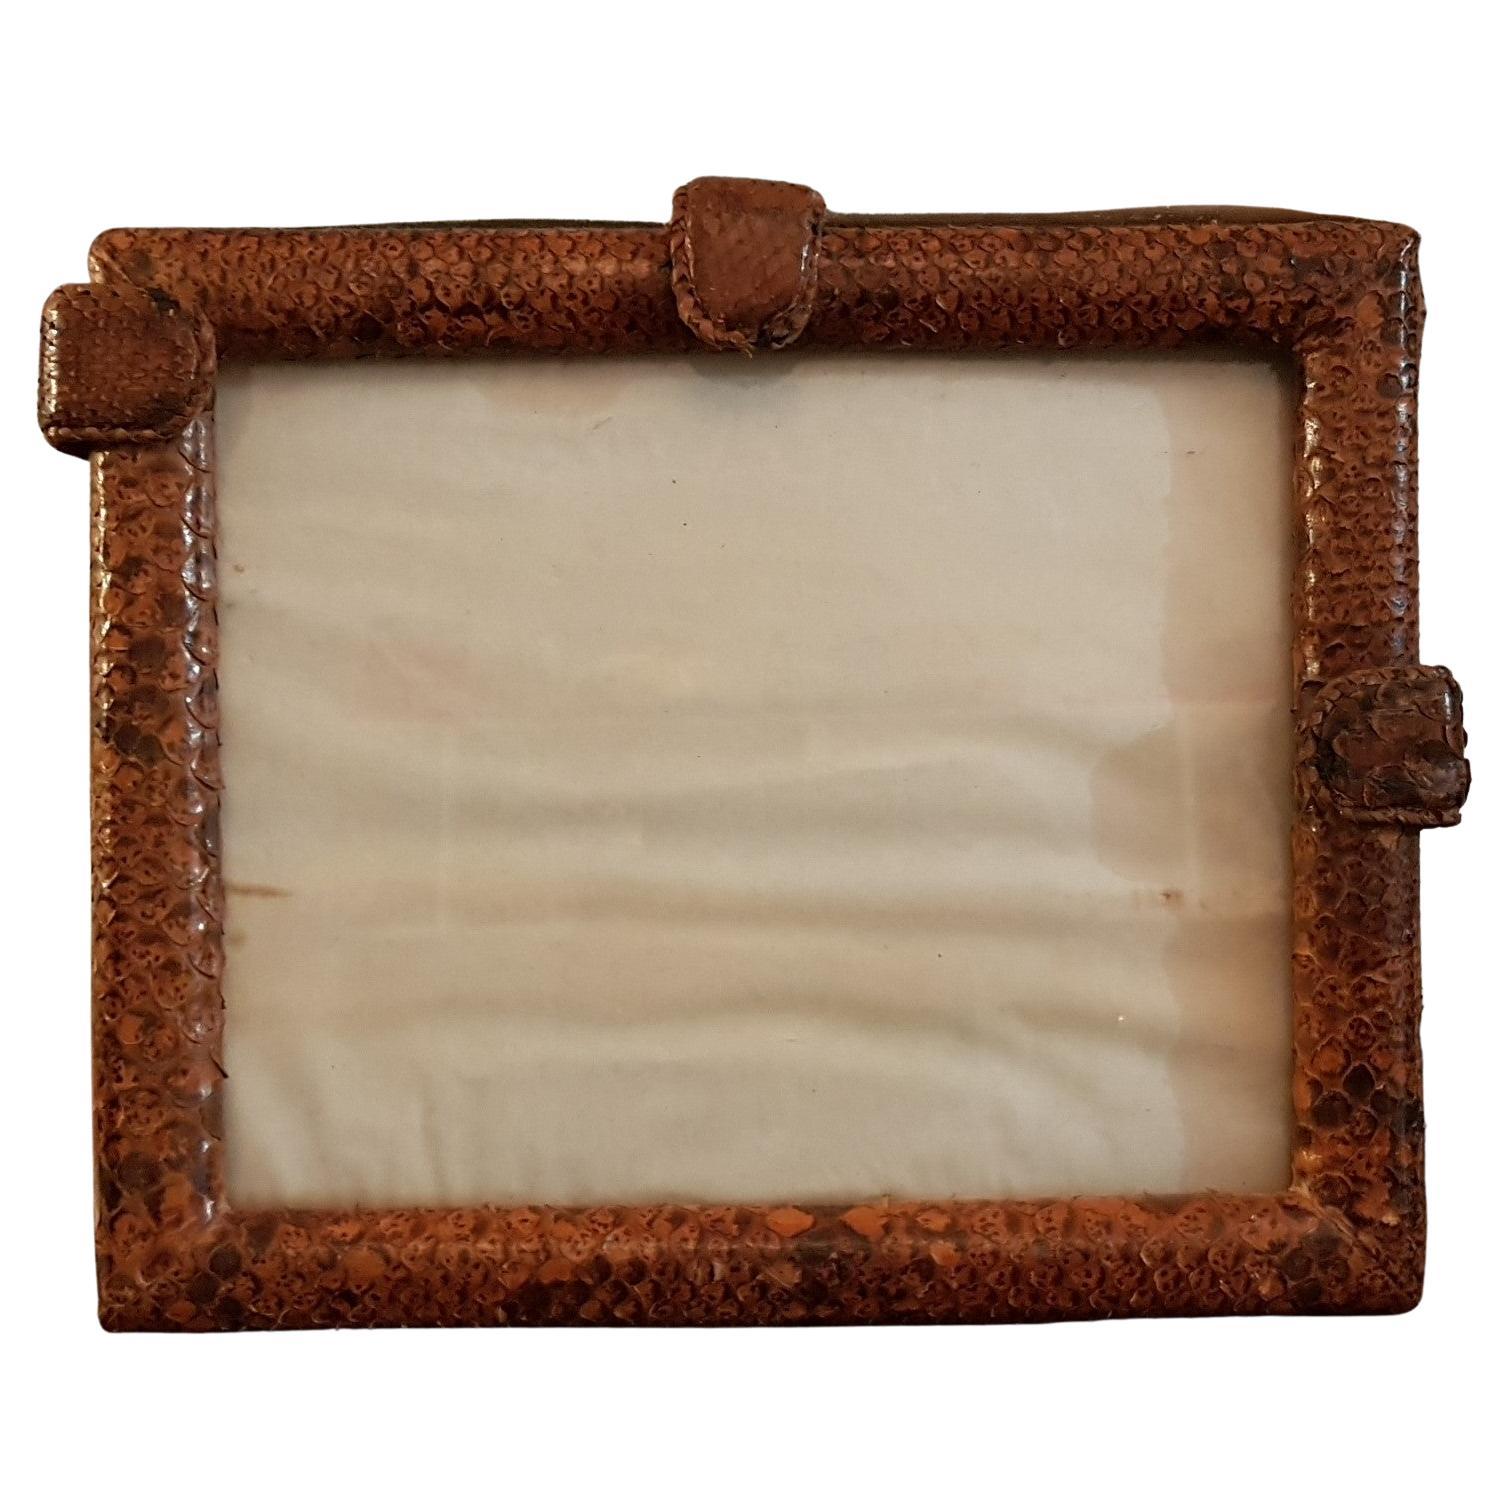 Rare Art Deco French Snakeskin Picture Frame For Sale